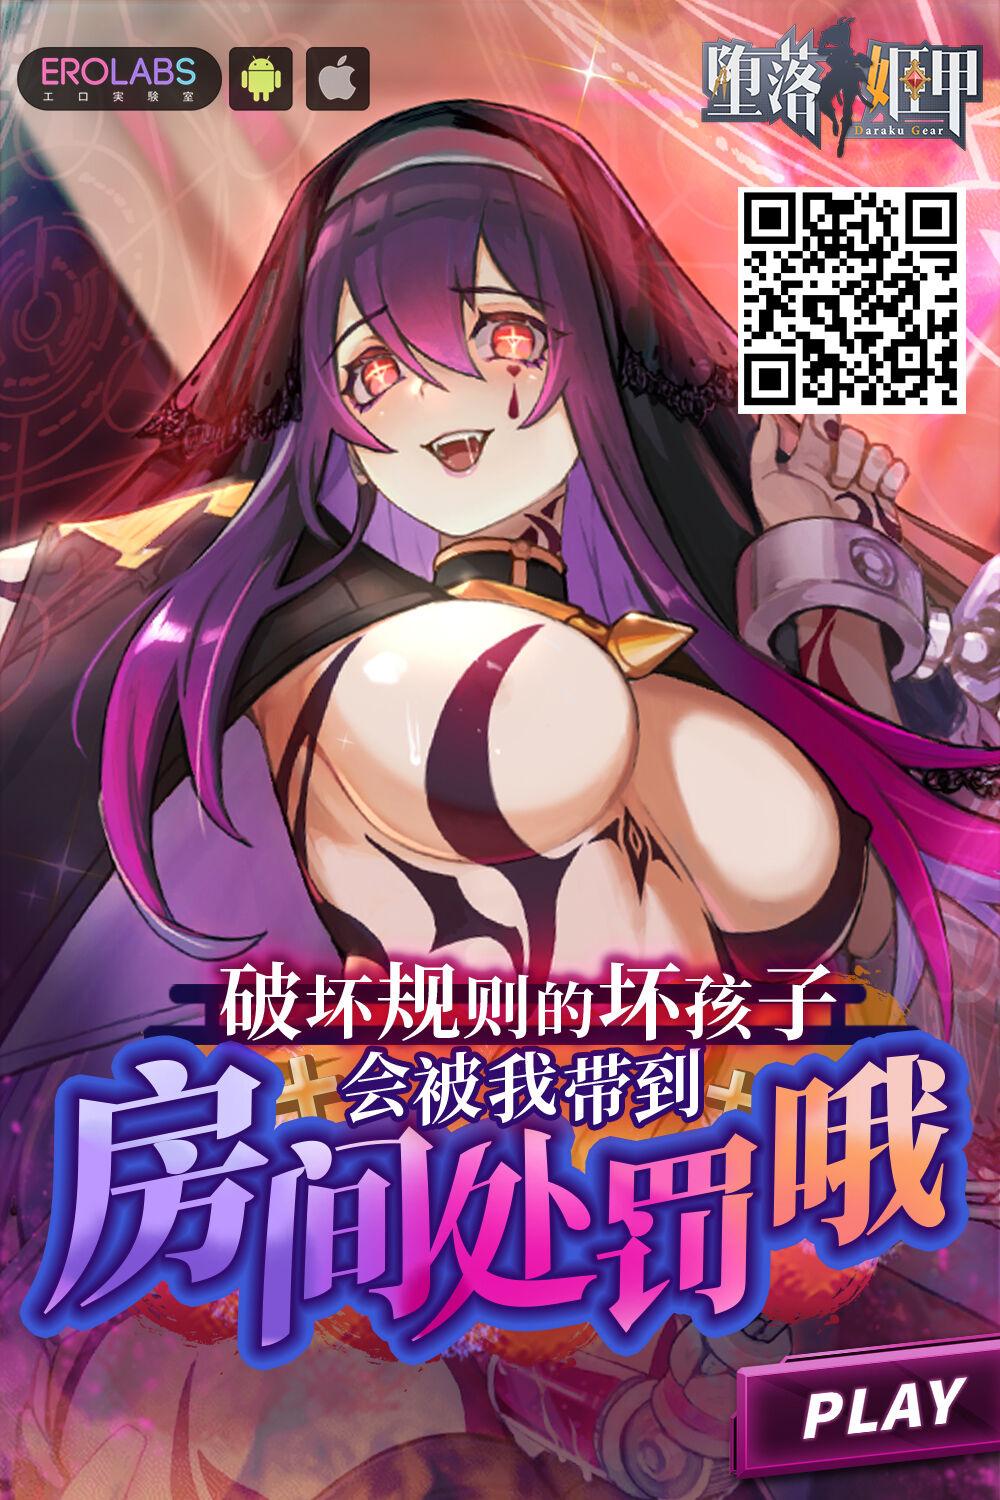 Inma Joshi Daisei no Yuuutsu - The Melancholy of the Succubus who is a college student Ch. 5 20